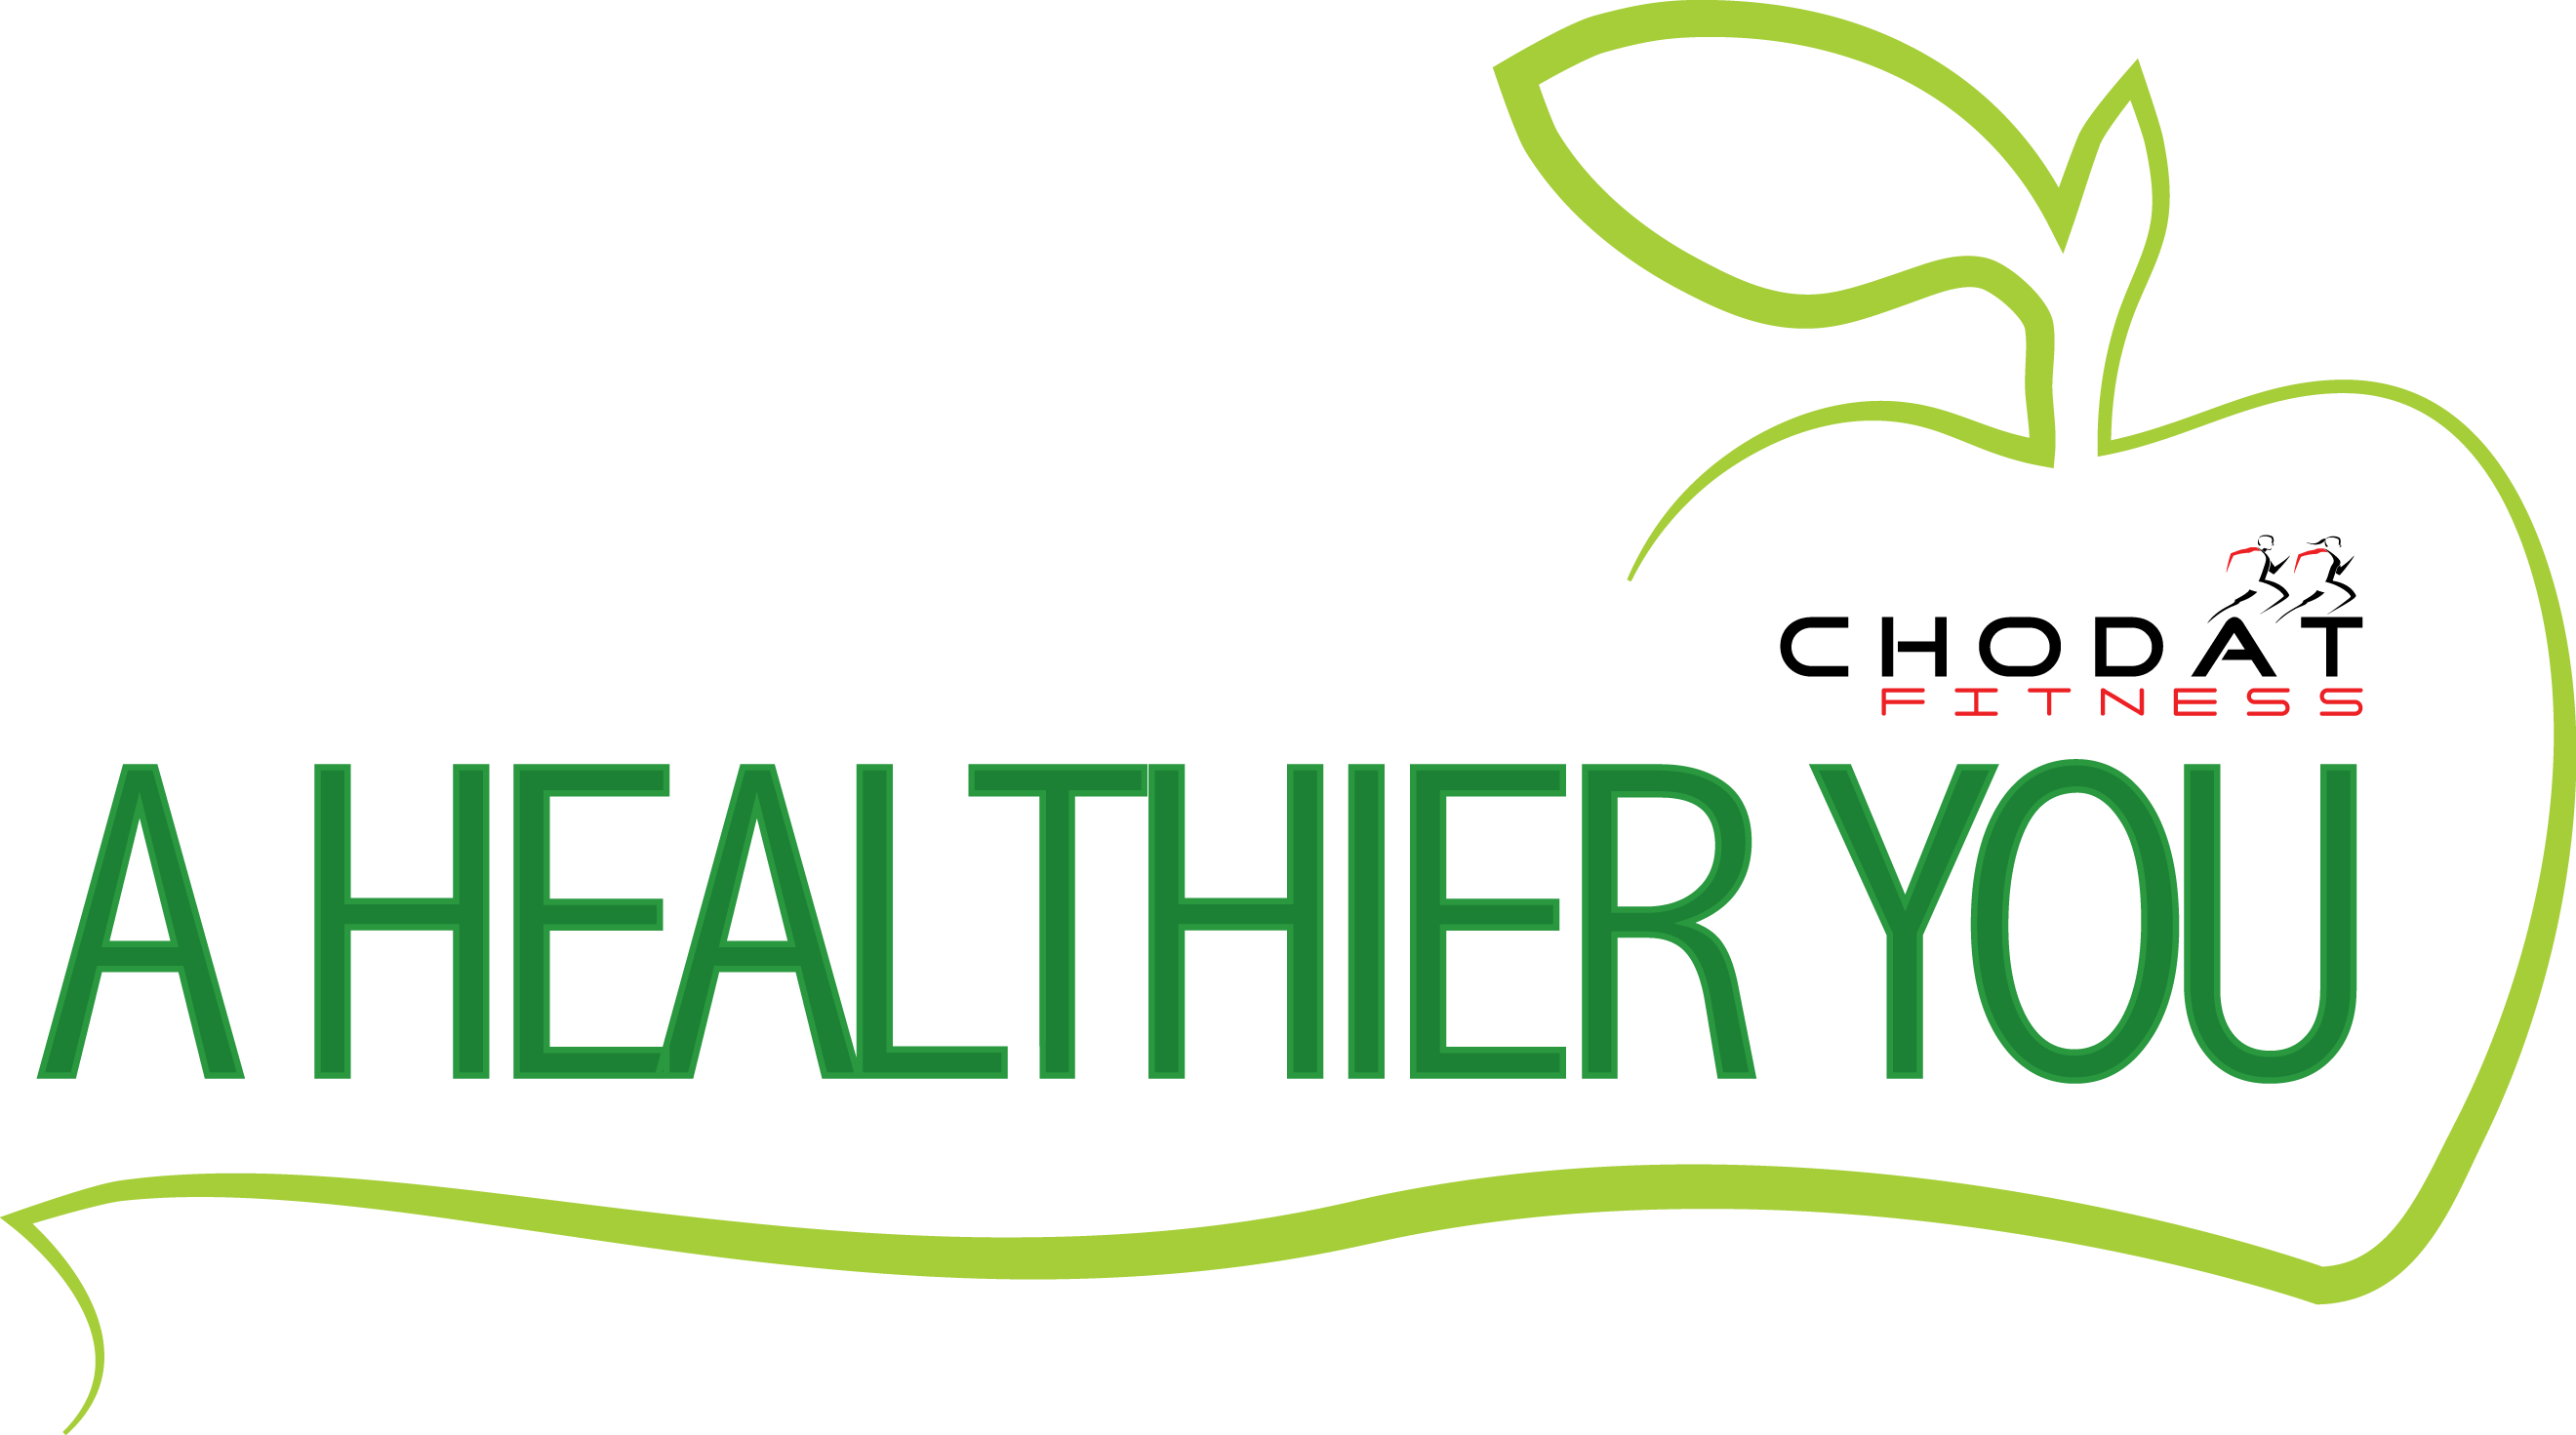 A Healthier You- RESULTS